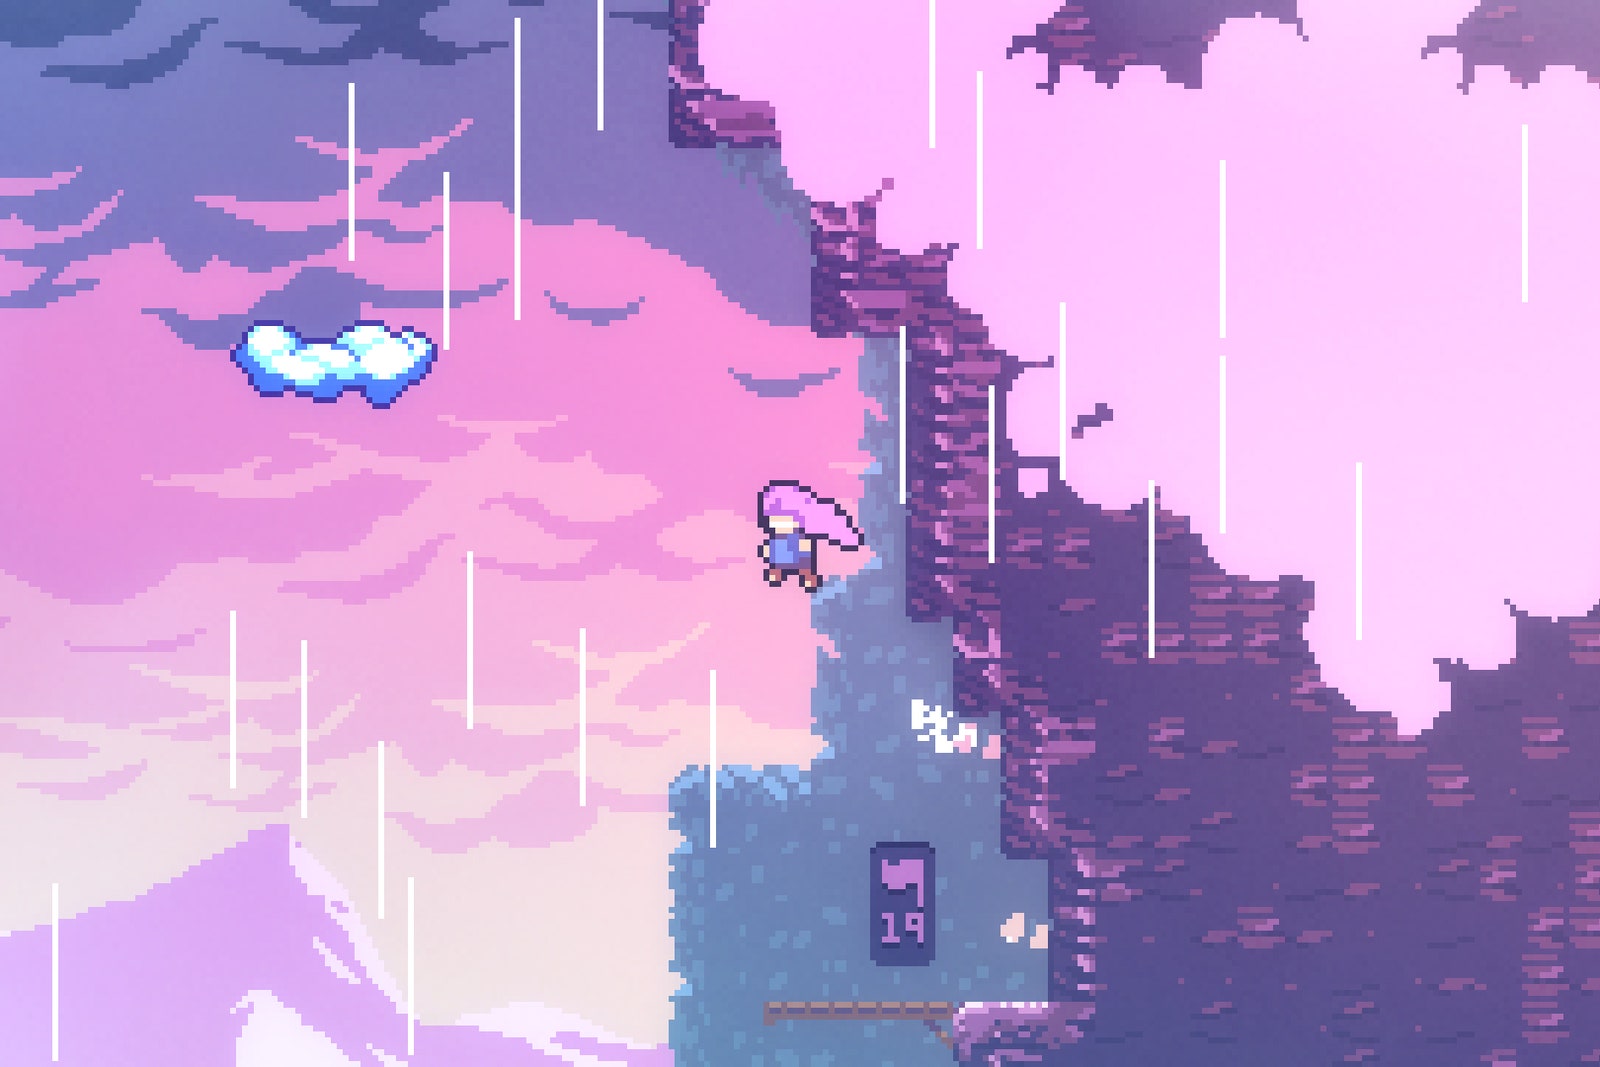 screenshot of Celeste game featuring pixelated skyline and character jumping